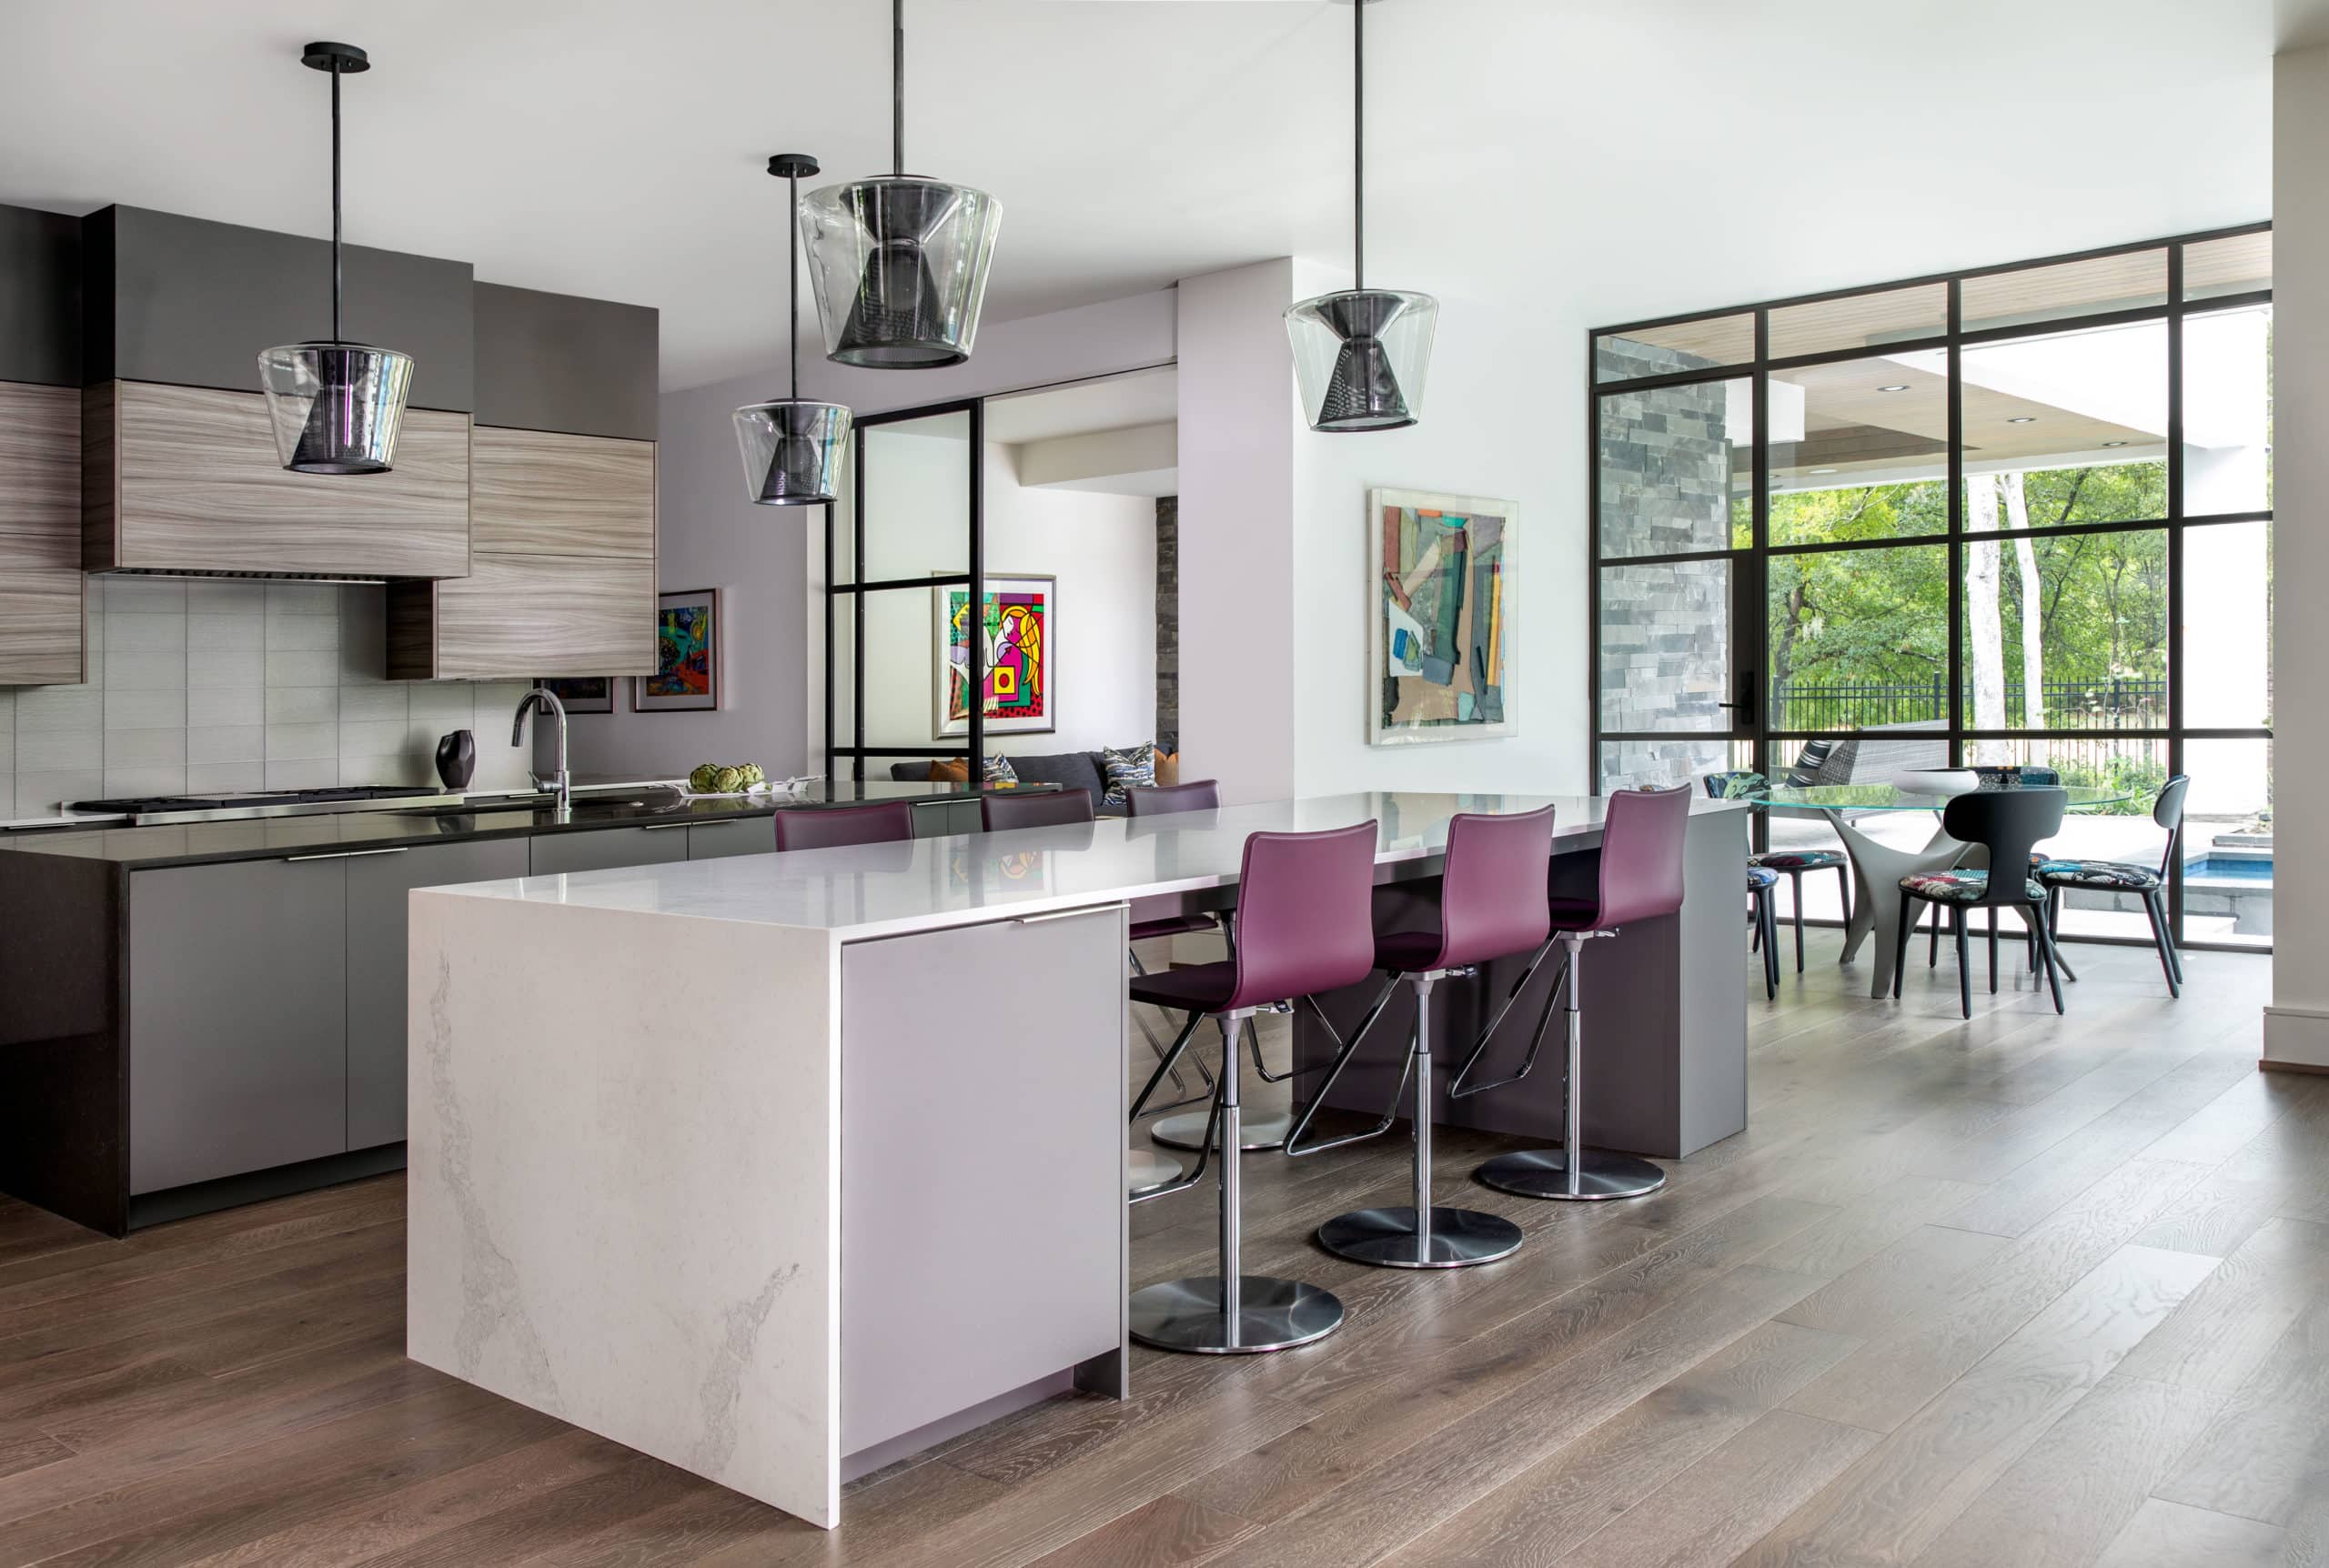 The Kitchen at Regentview with aubergine stools and Troy Lighting pendants